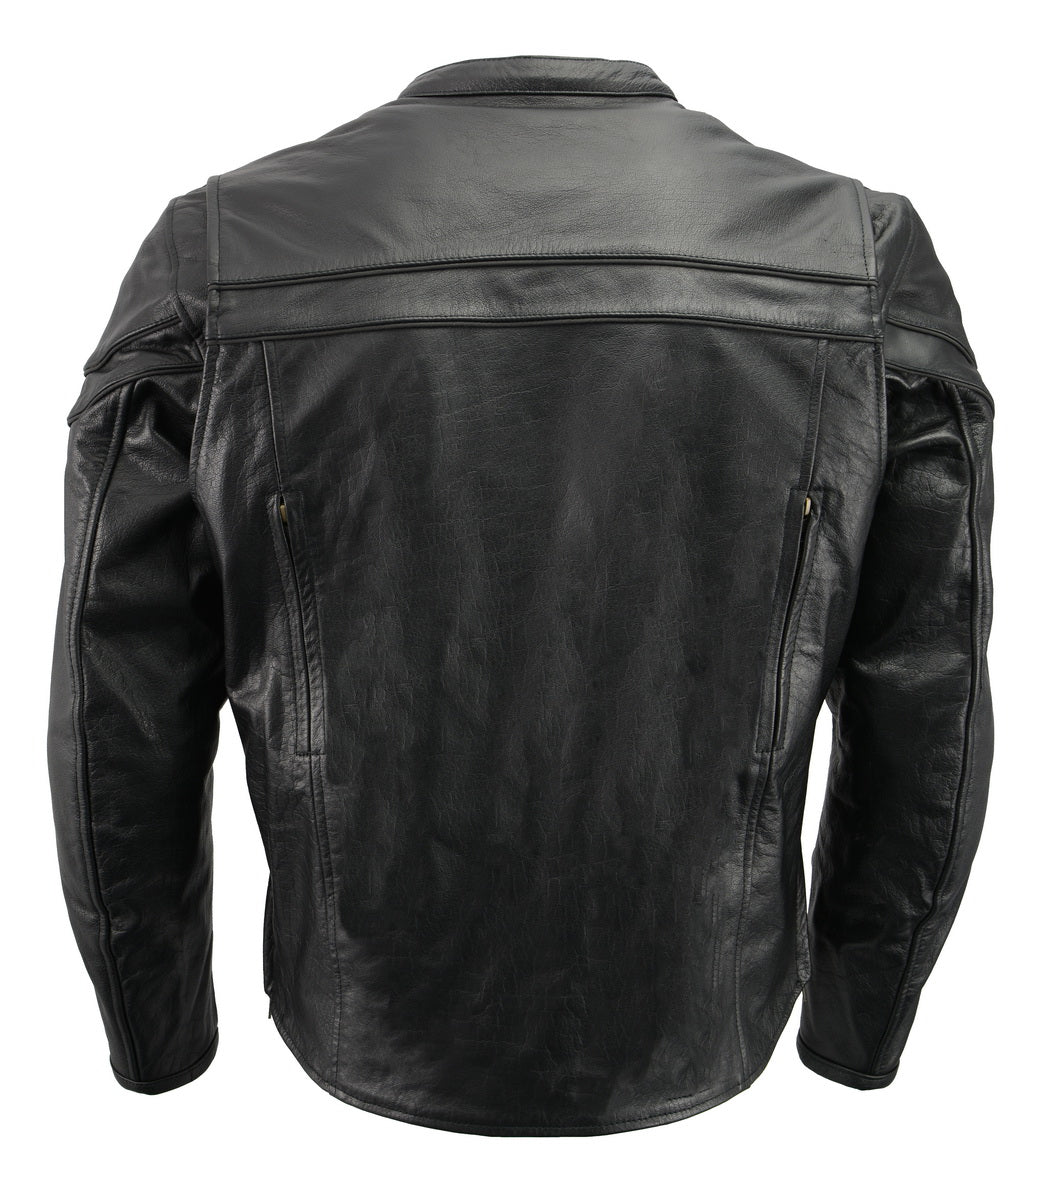 Men’s Premium Black Leather Crossover Vented Motorcycle Riding Jacket with Removable Armor Protection BZ2525